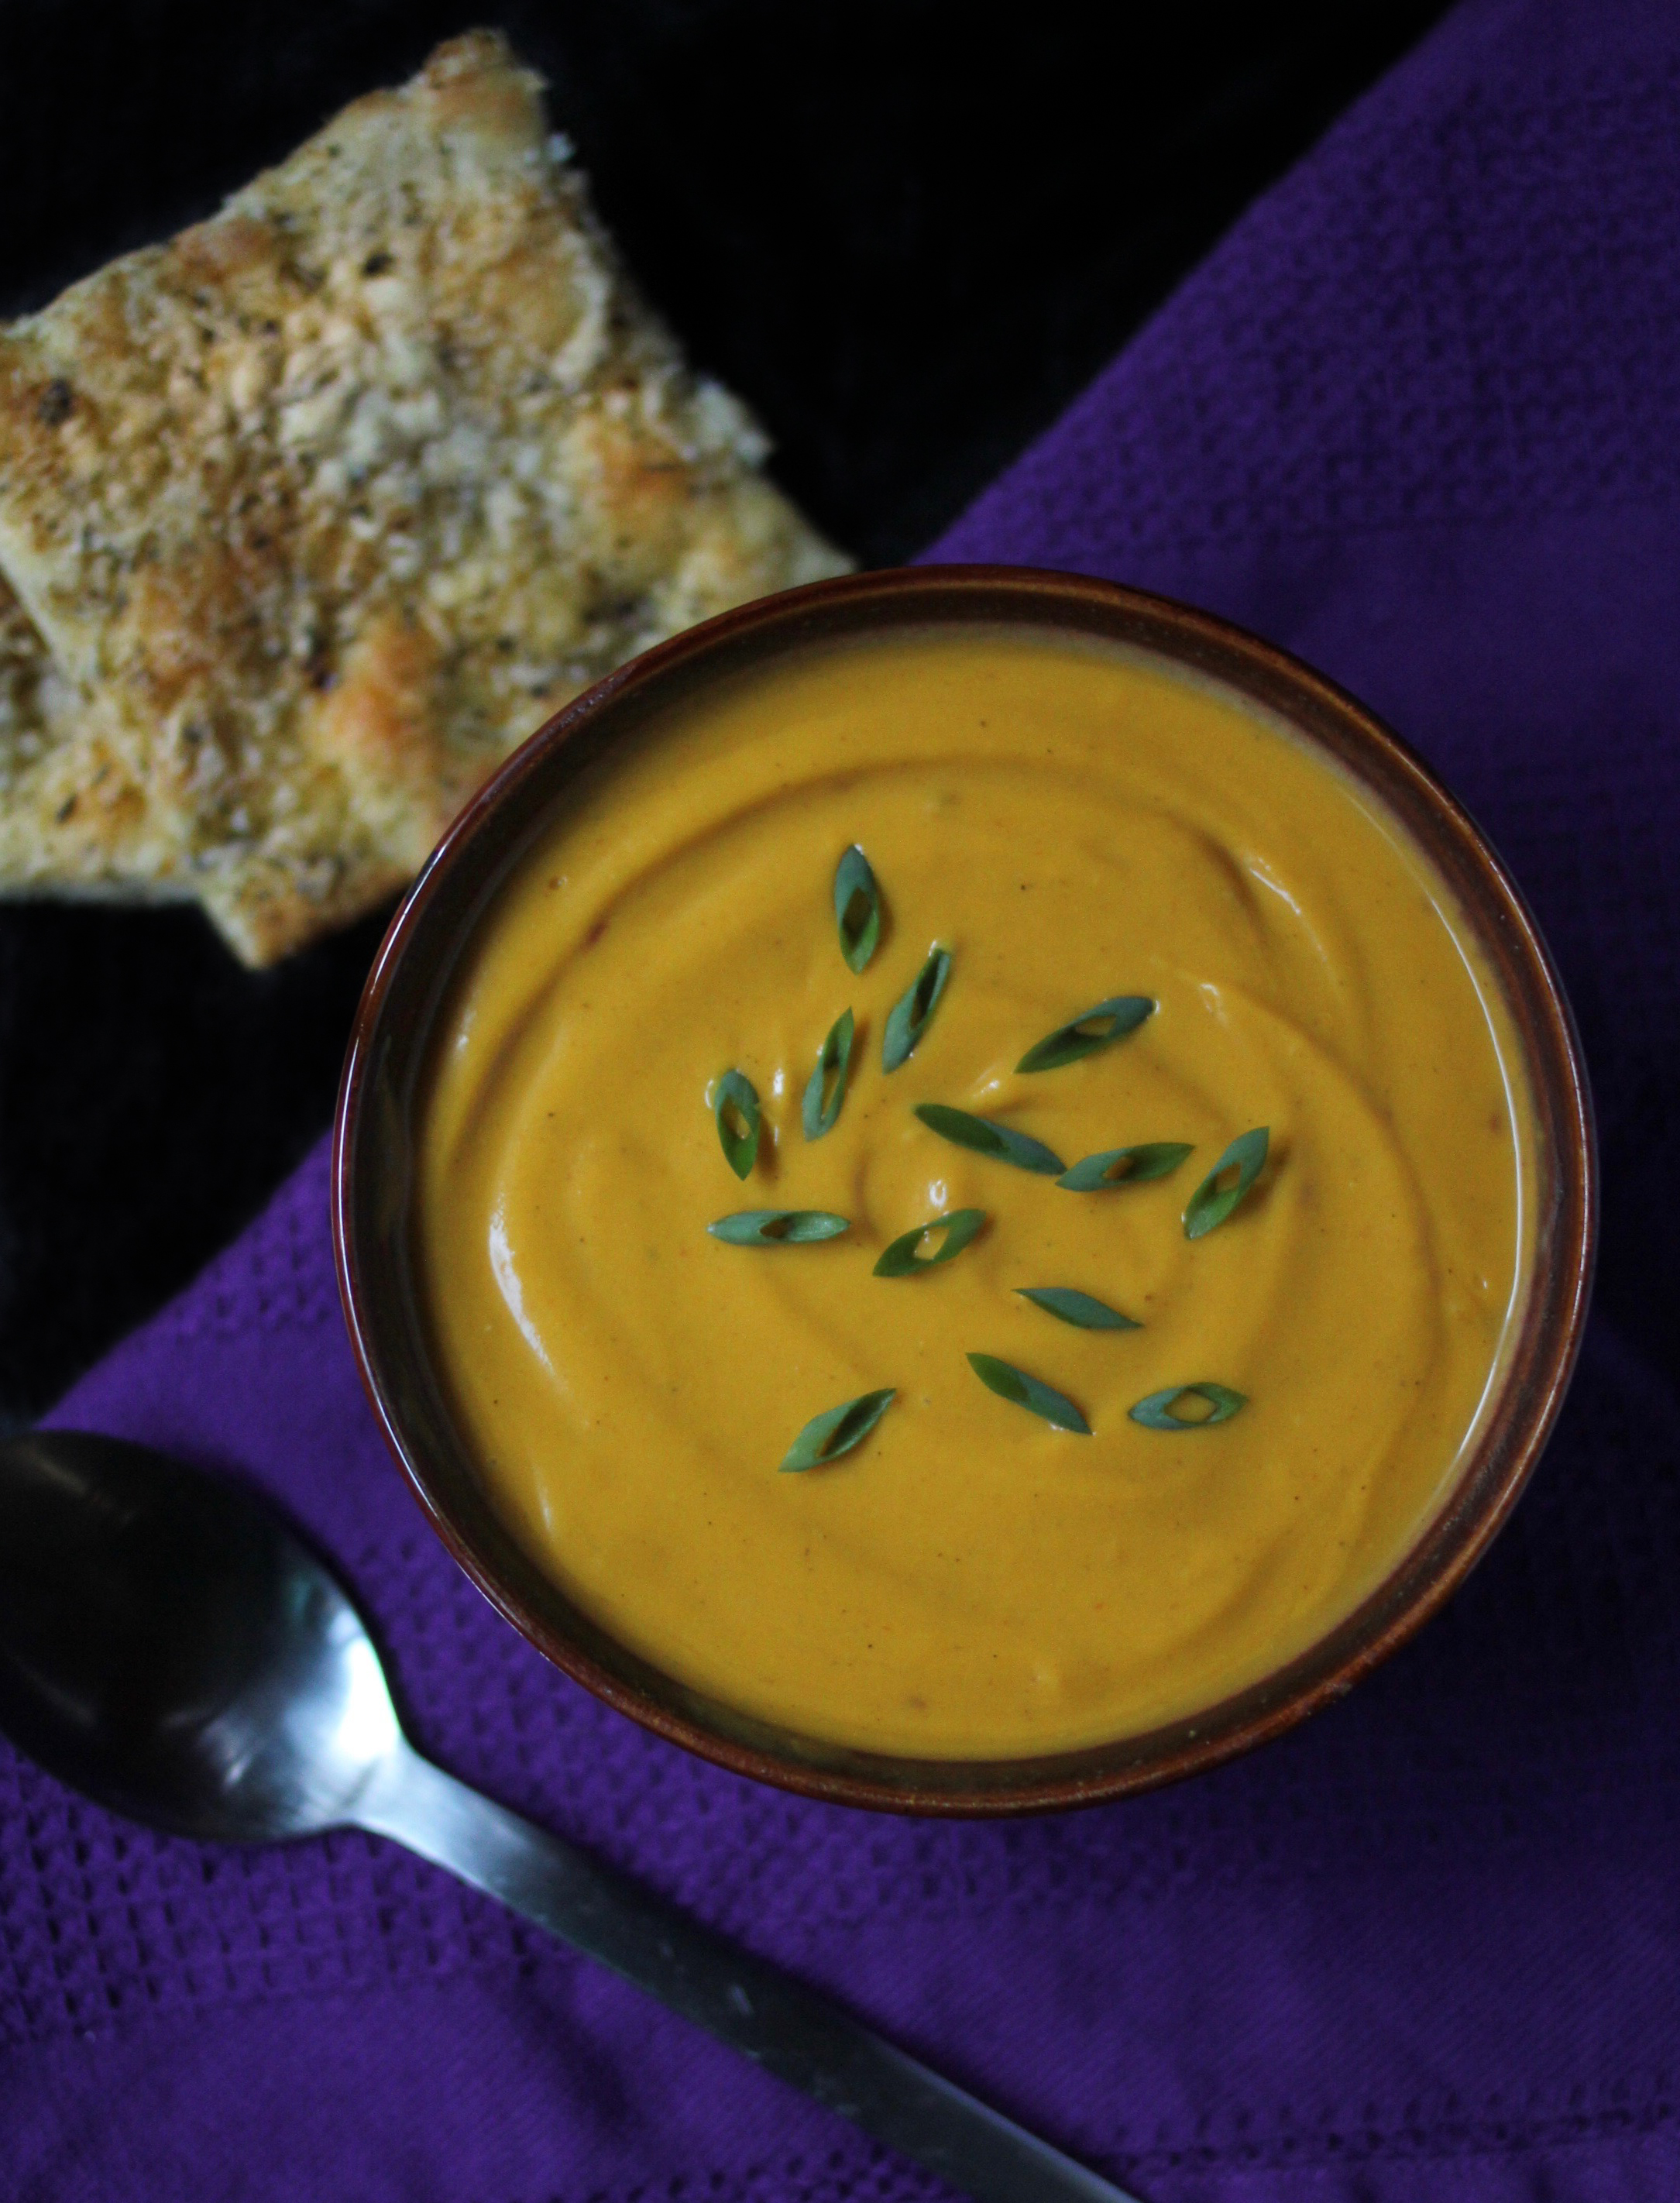 Forbidden Rice Blog - Roasted Butternut Squash and Carrot Soup